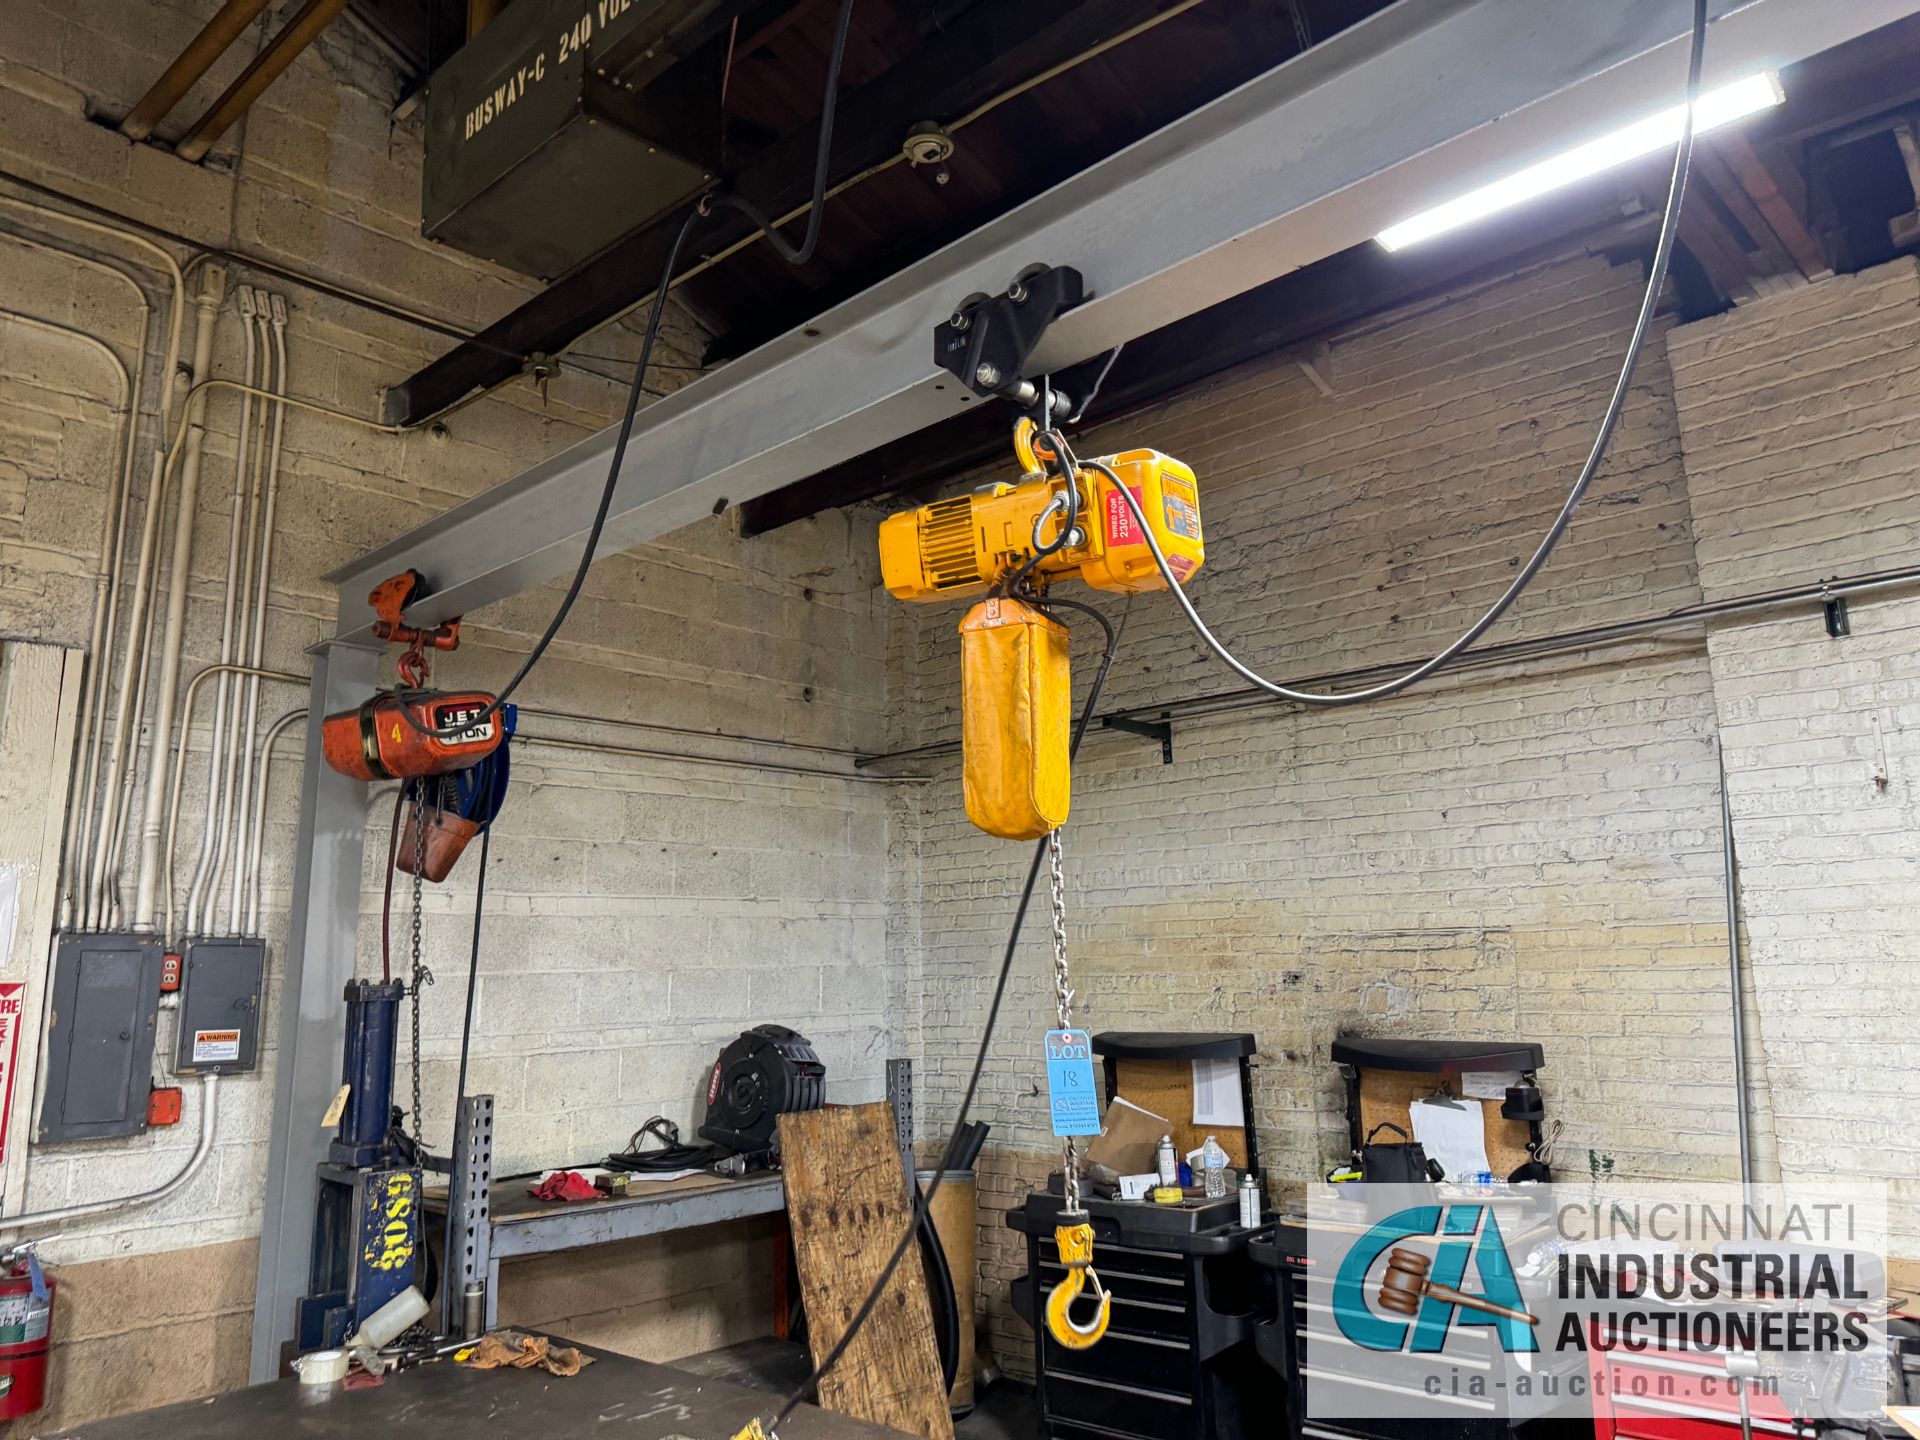 Free Standing 1 Crane w/ (2) 1 Ton Electric Hoists 6"x 6" Beams, 224" Span, 112" Beam Height - Image 2 of 5